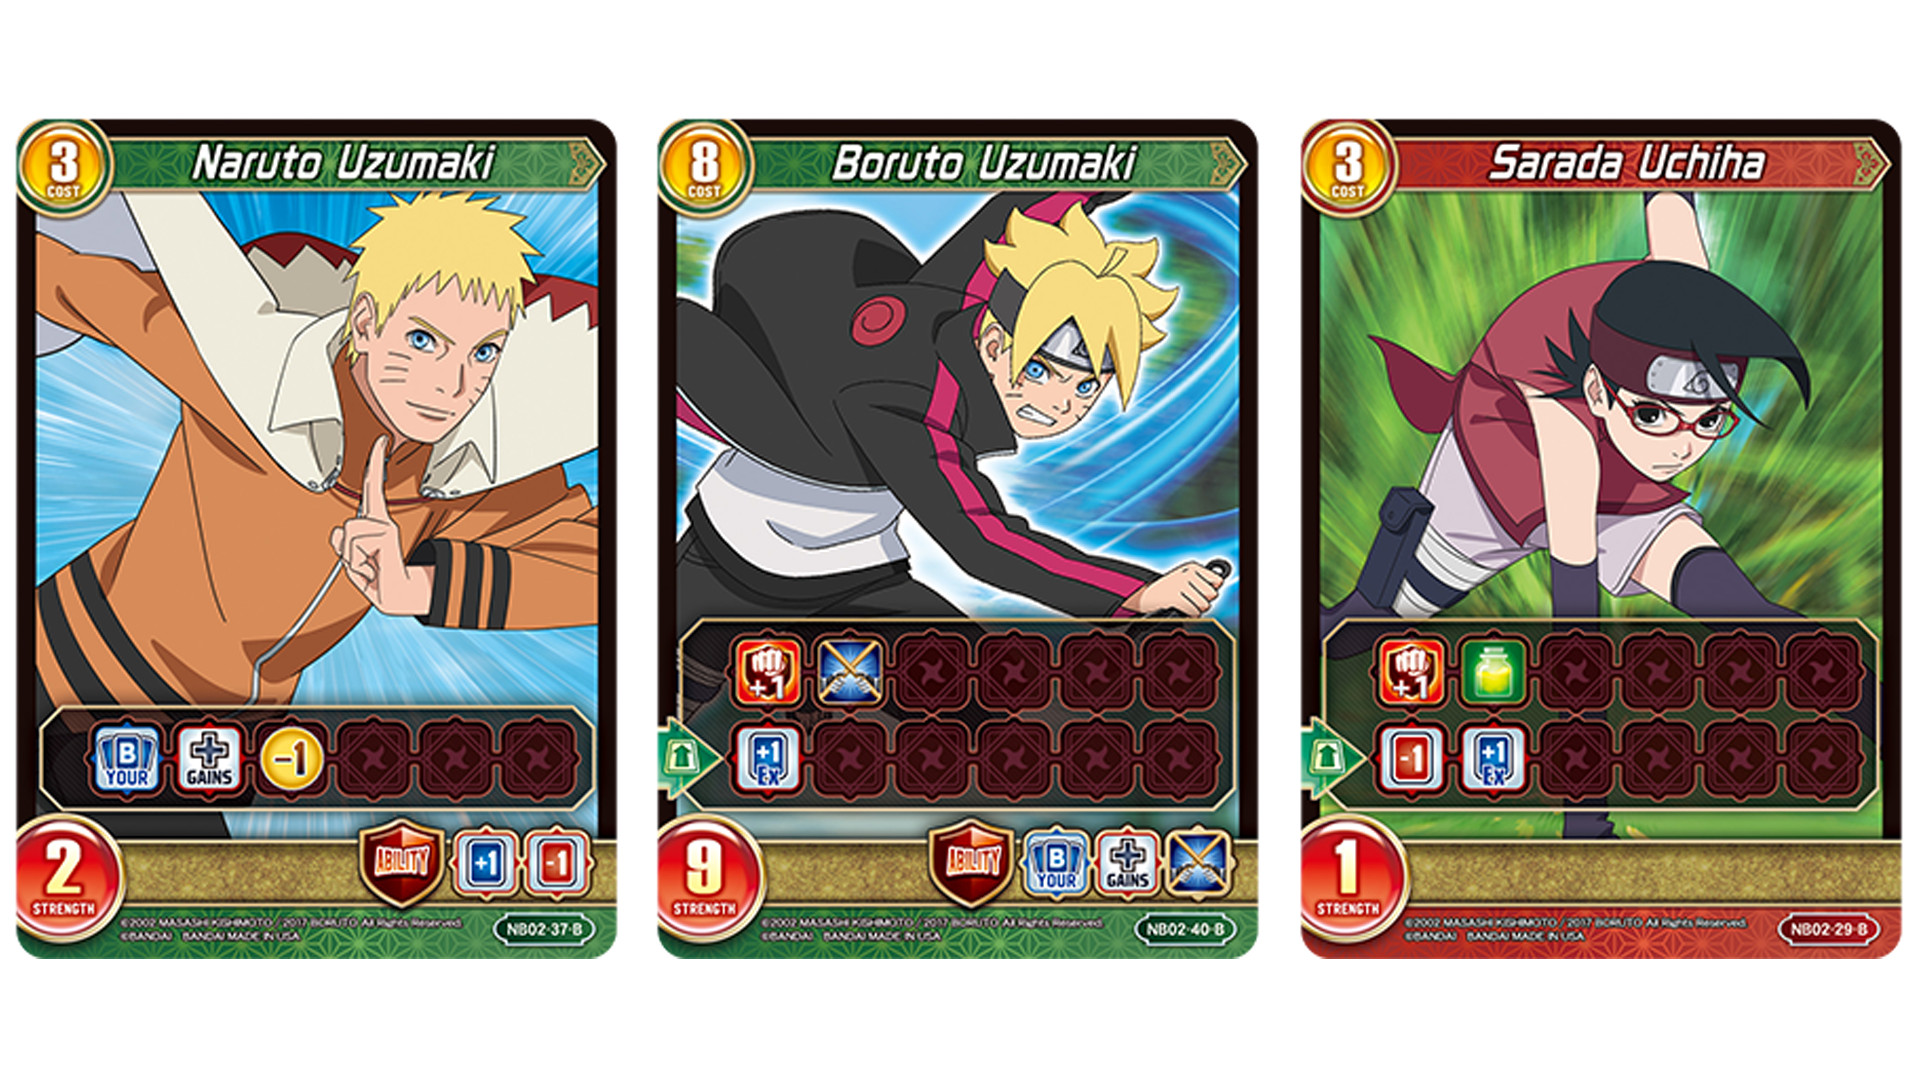 10 best anime board games from Dragon Ball Super to My Hero Academia   Dicebreaker